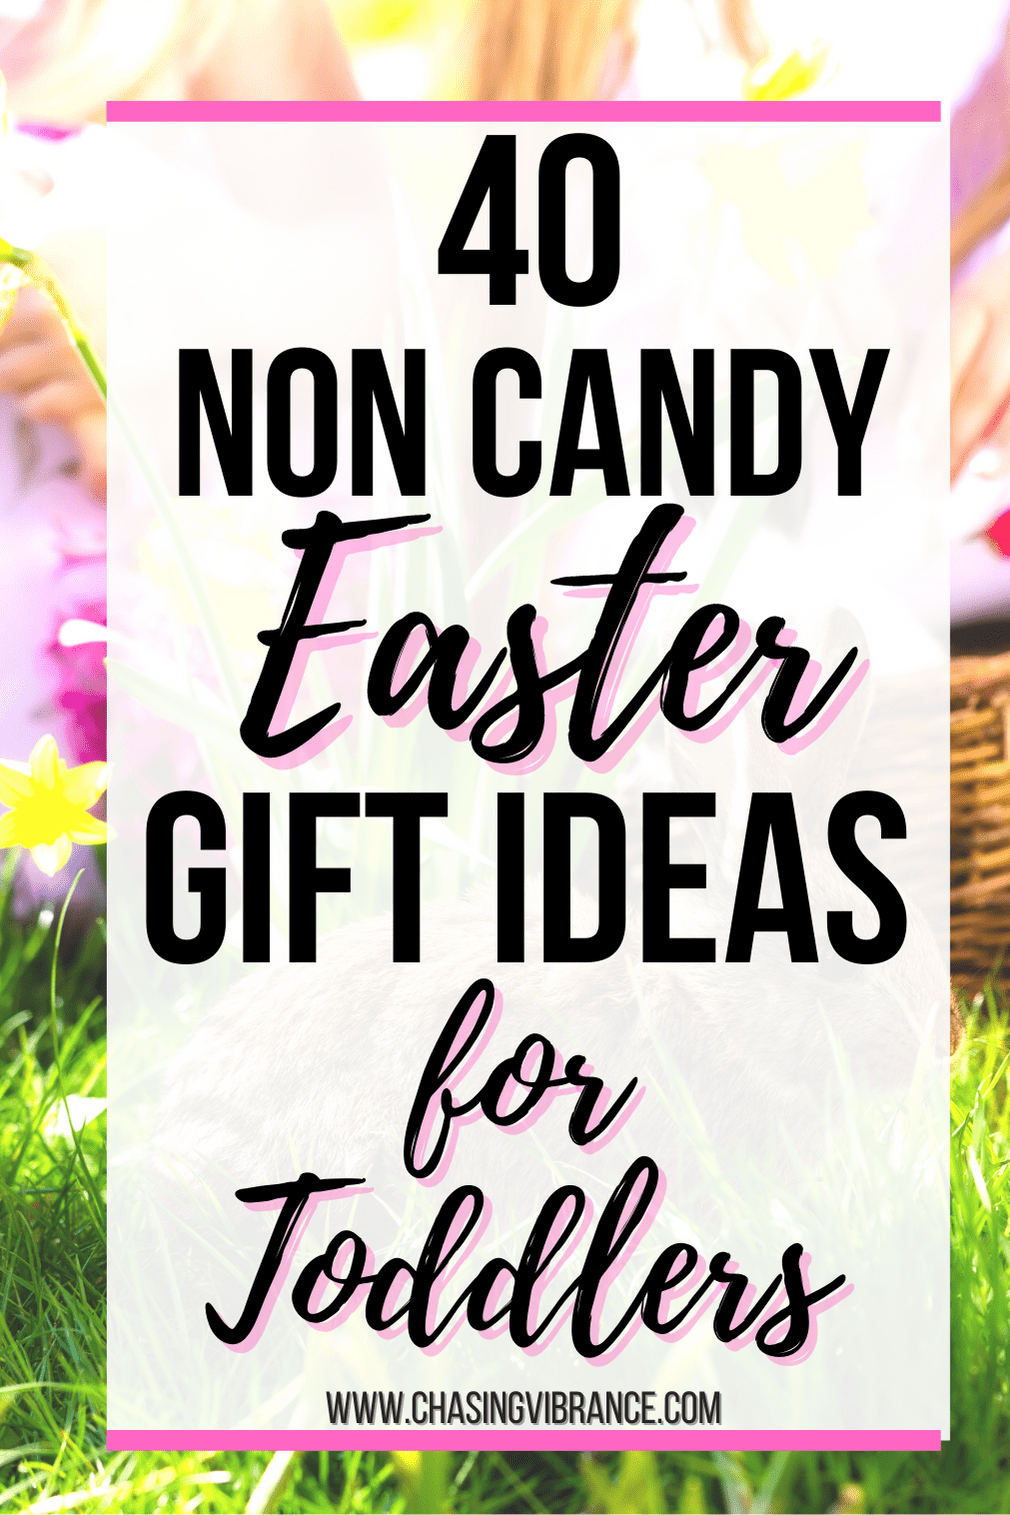 40 Non Candy Easter Basket Gift Ideas for Toddlers